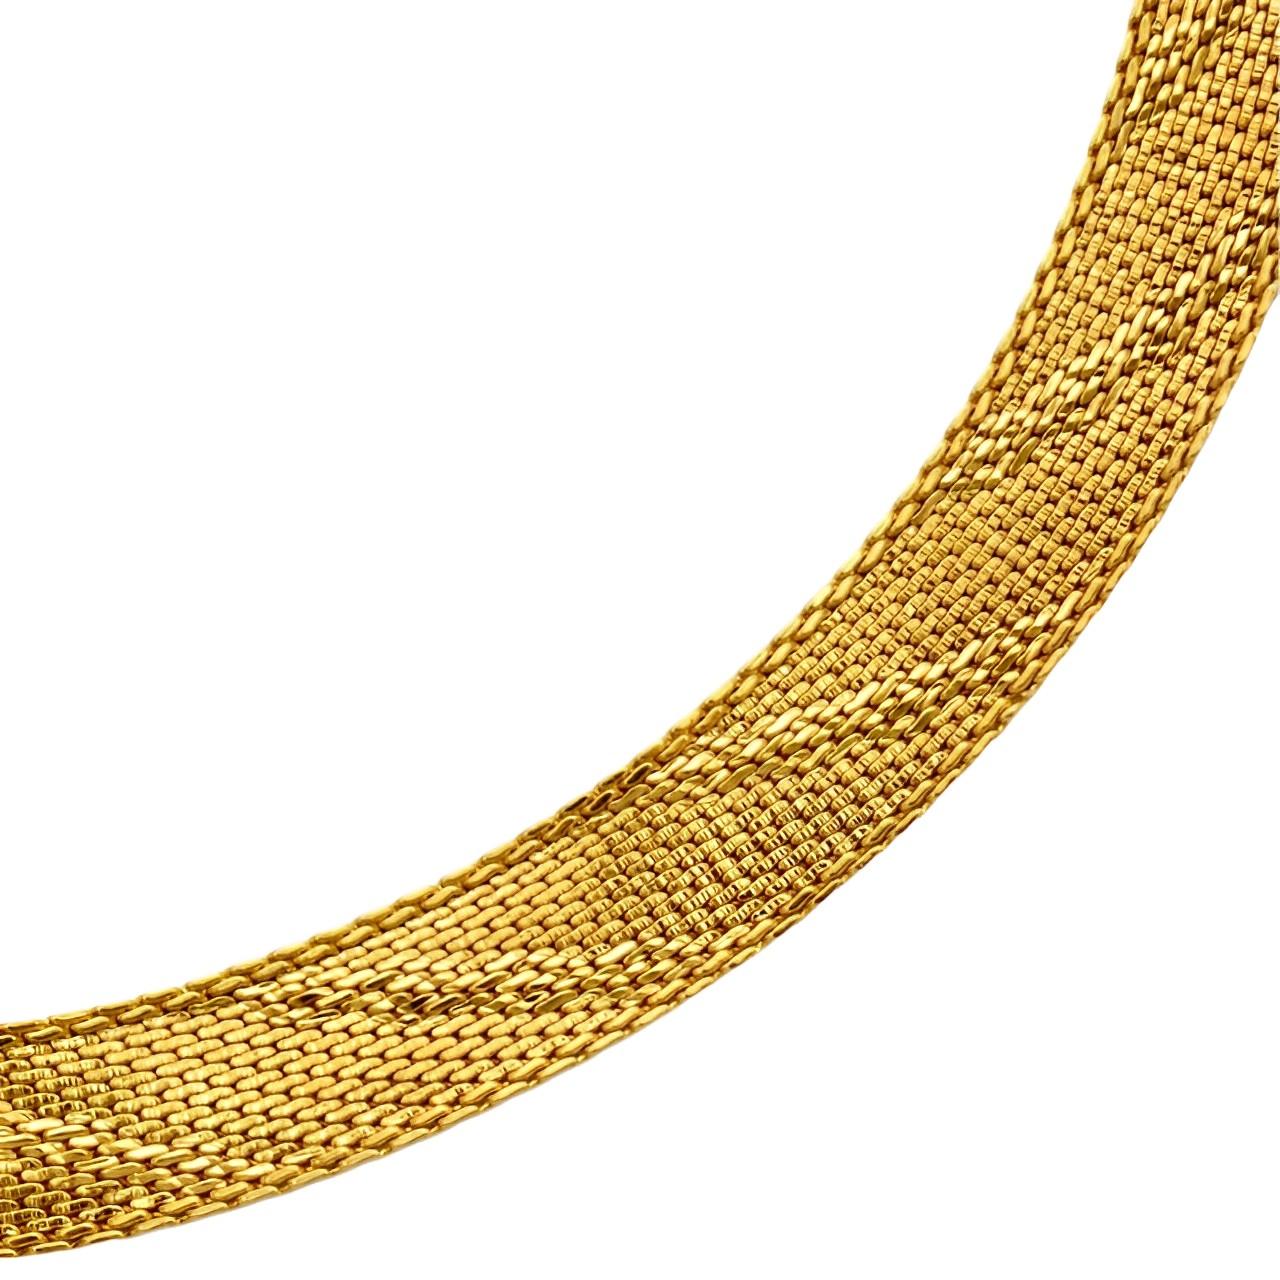 Gold Plated Egyptian Revival Textured Collar Necklace circa 1980s For Sale 1